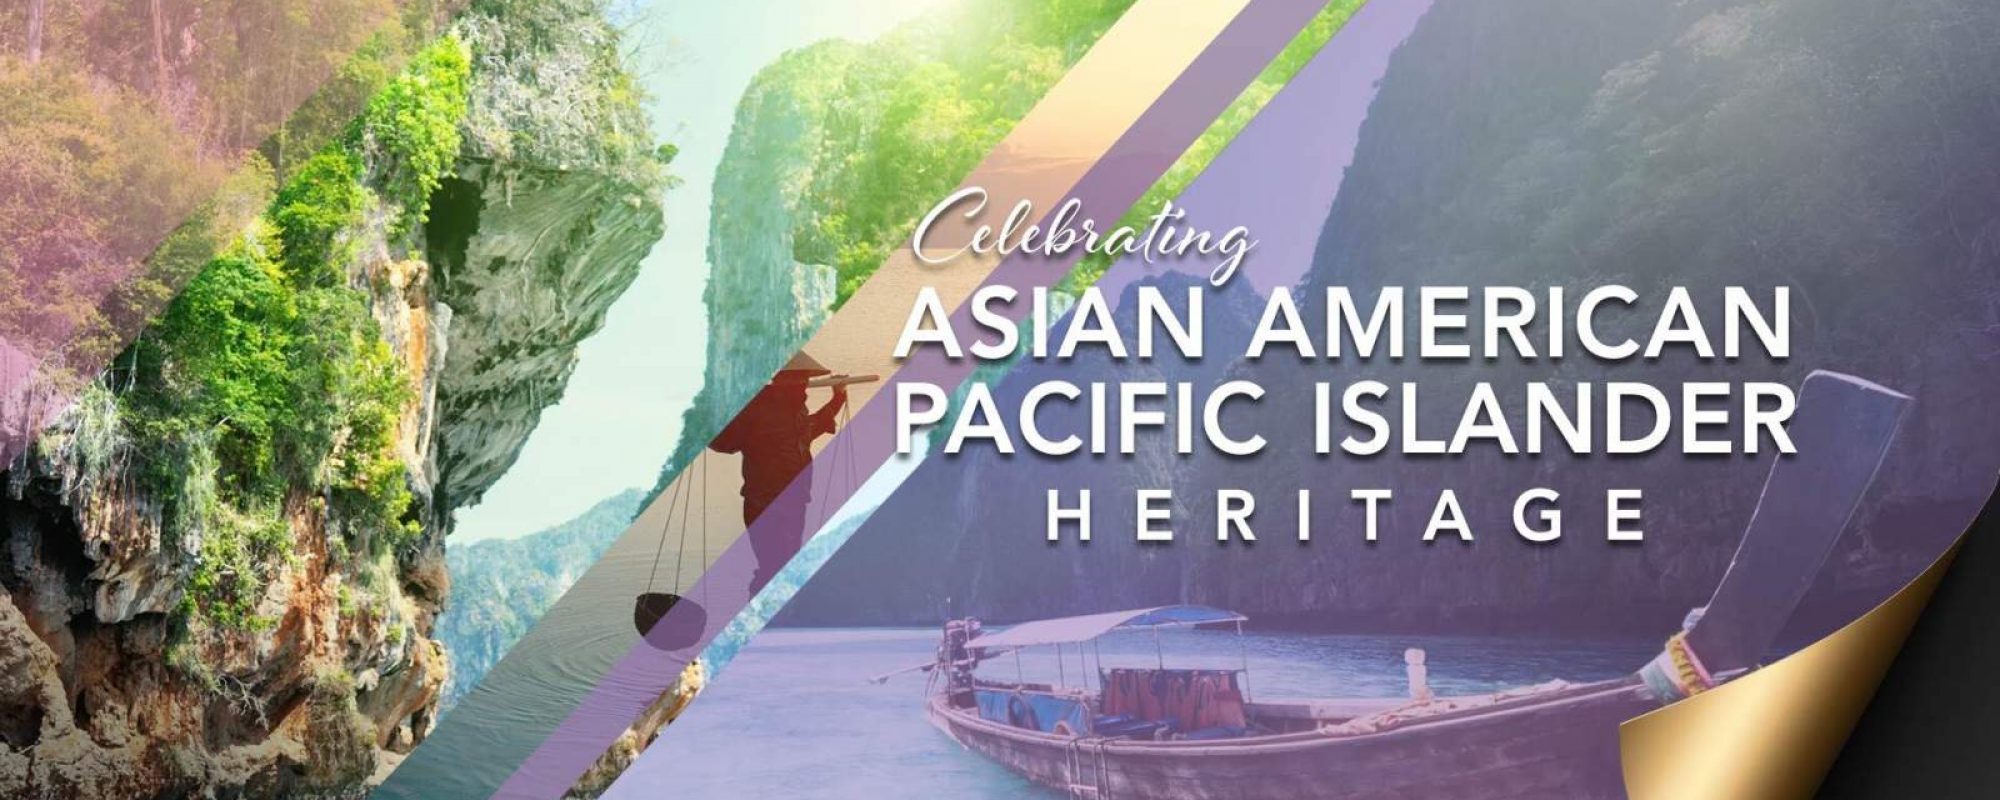 OVATION TV CELEBRATES ASIAN AMERICAN AND PACIFIC ISLANDER HERITAGE MONTH 2021 WITH SPECIAL MORNING BLOCK AND A CURATED ‘AAPI HERITAGE MONTH’ SECTION ON THE JOURNY APP